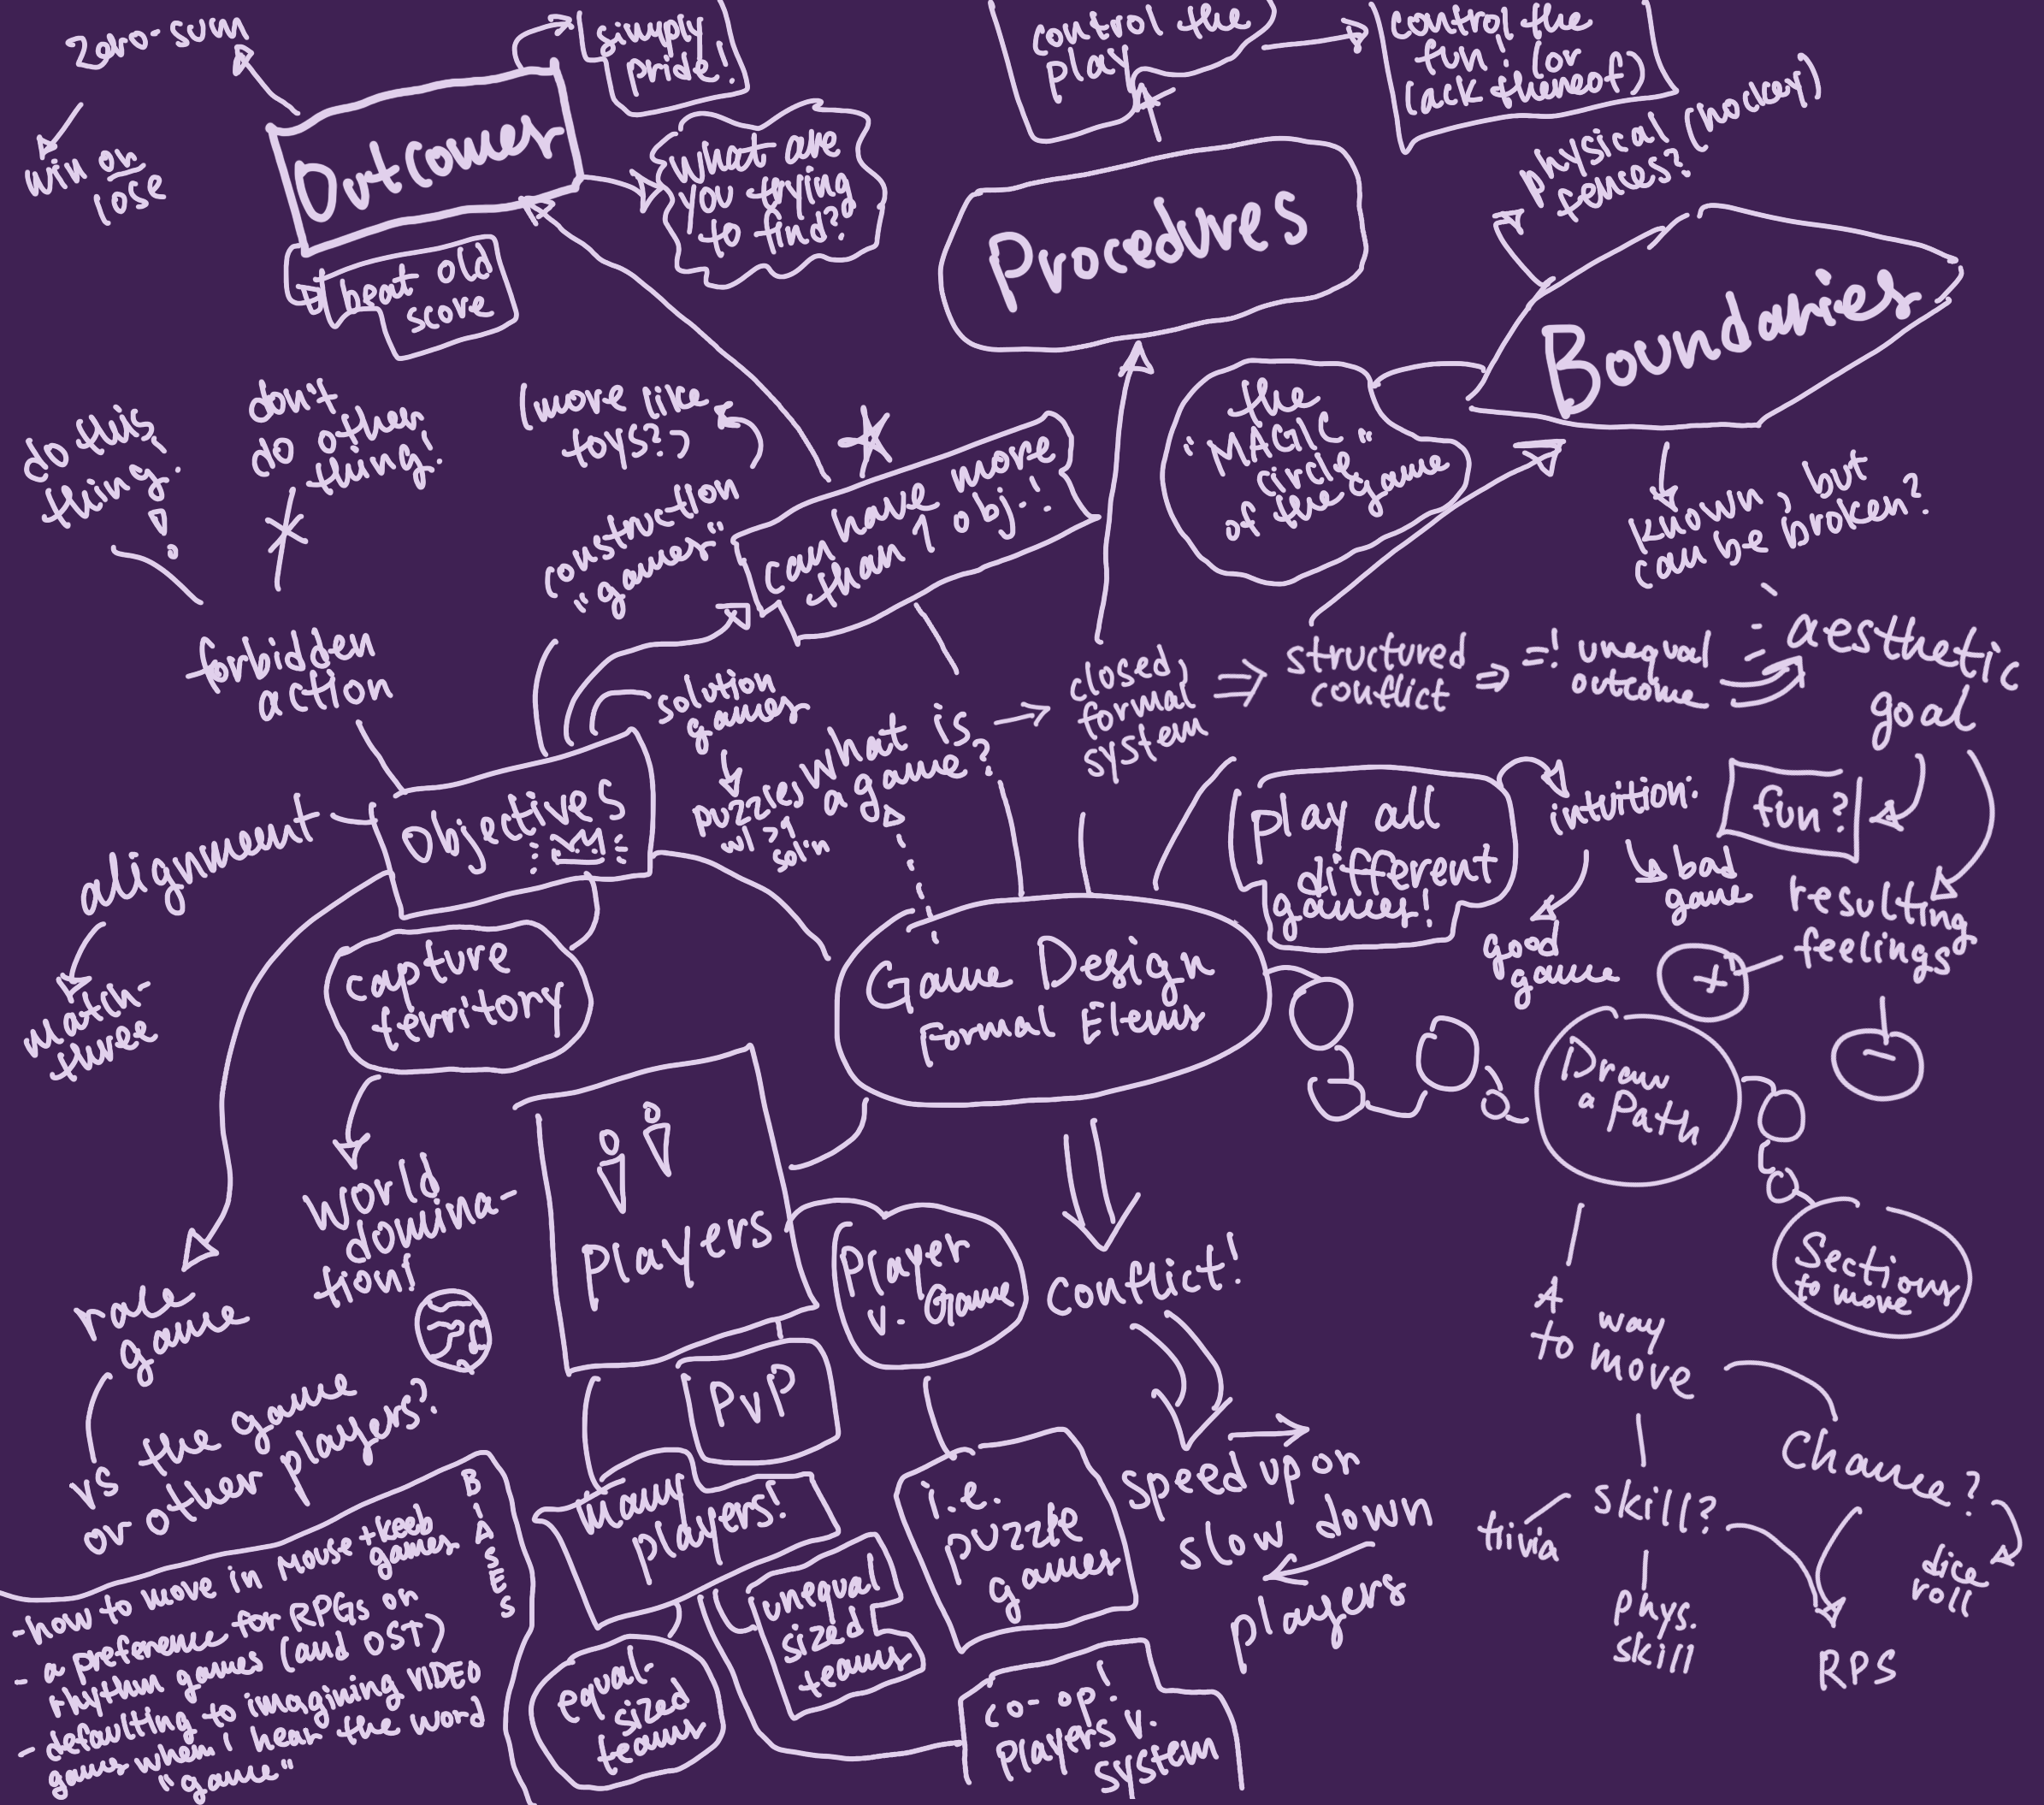 jrchin's mindmap about the formal elements of game design